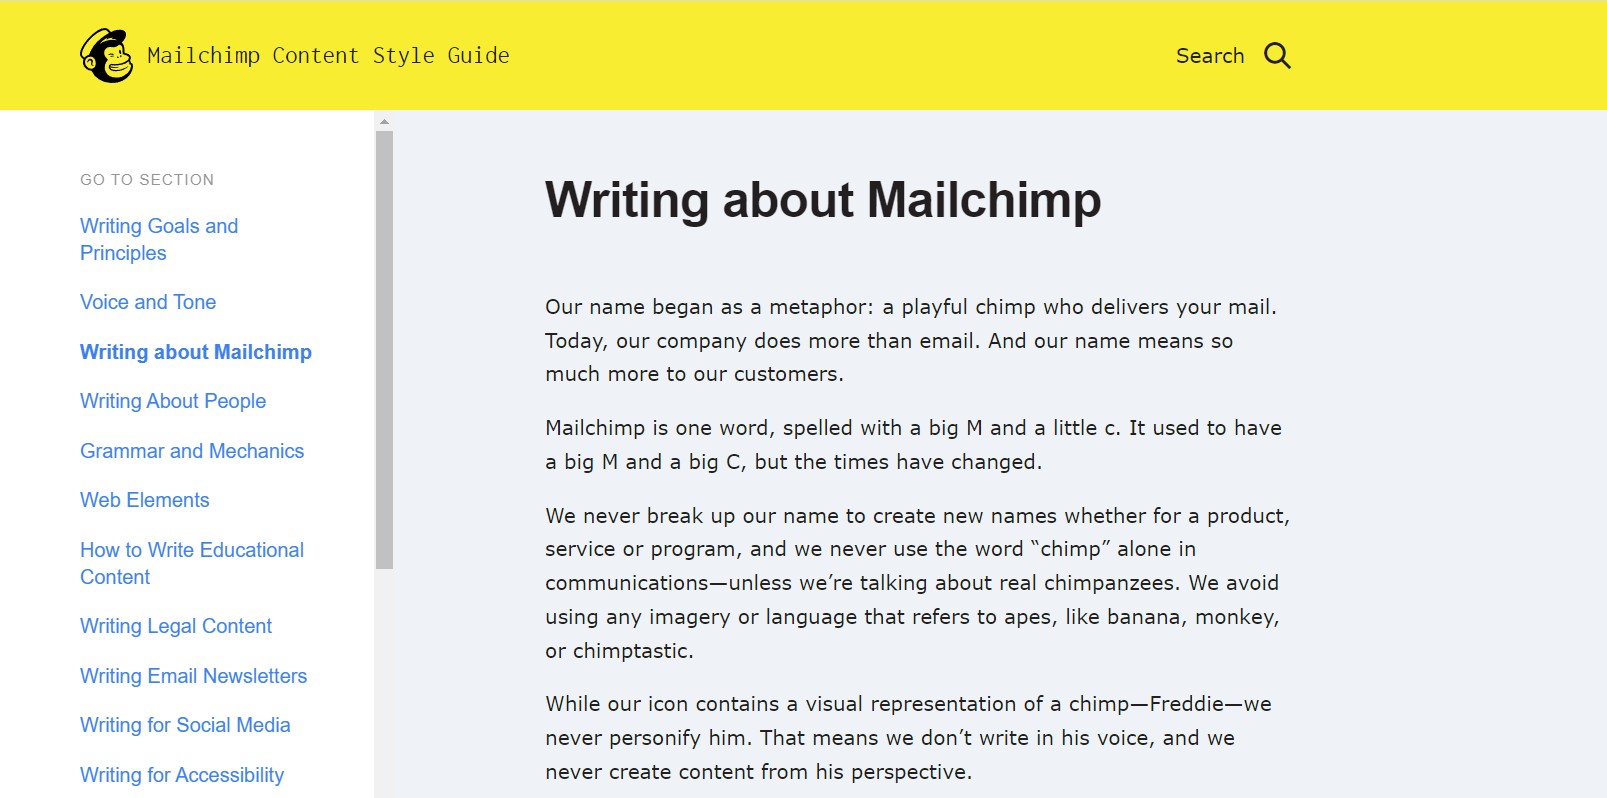 Mailchimp content style guide